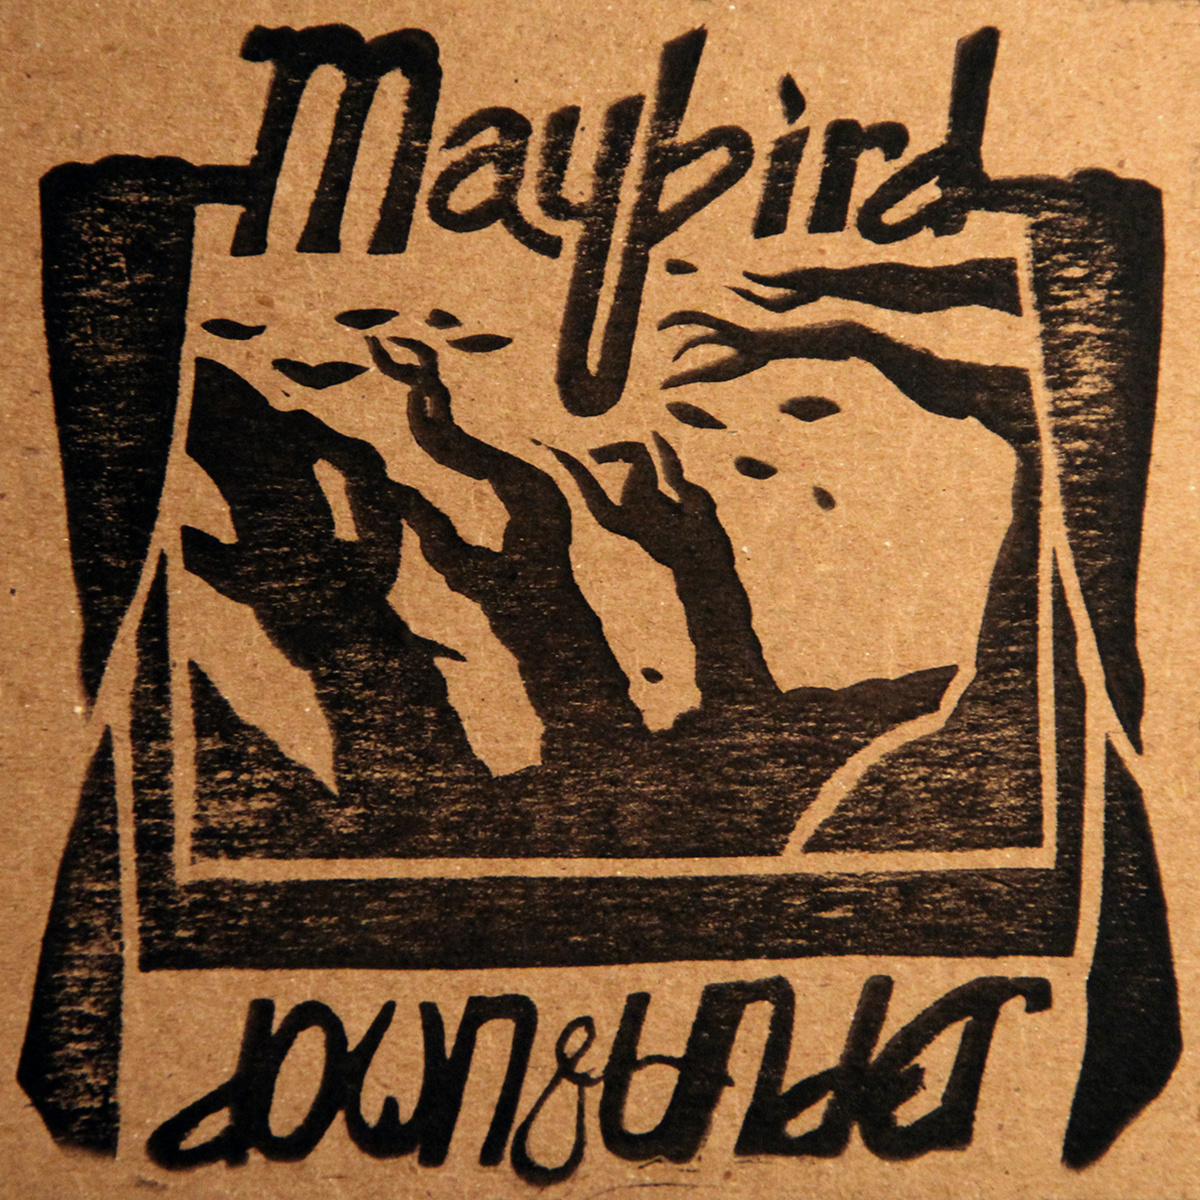 Maybird Reveals “Down and Under” Video